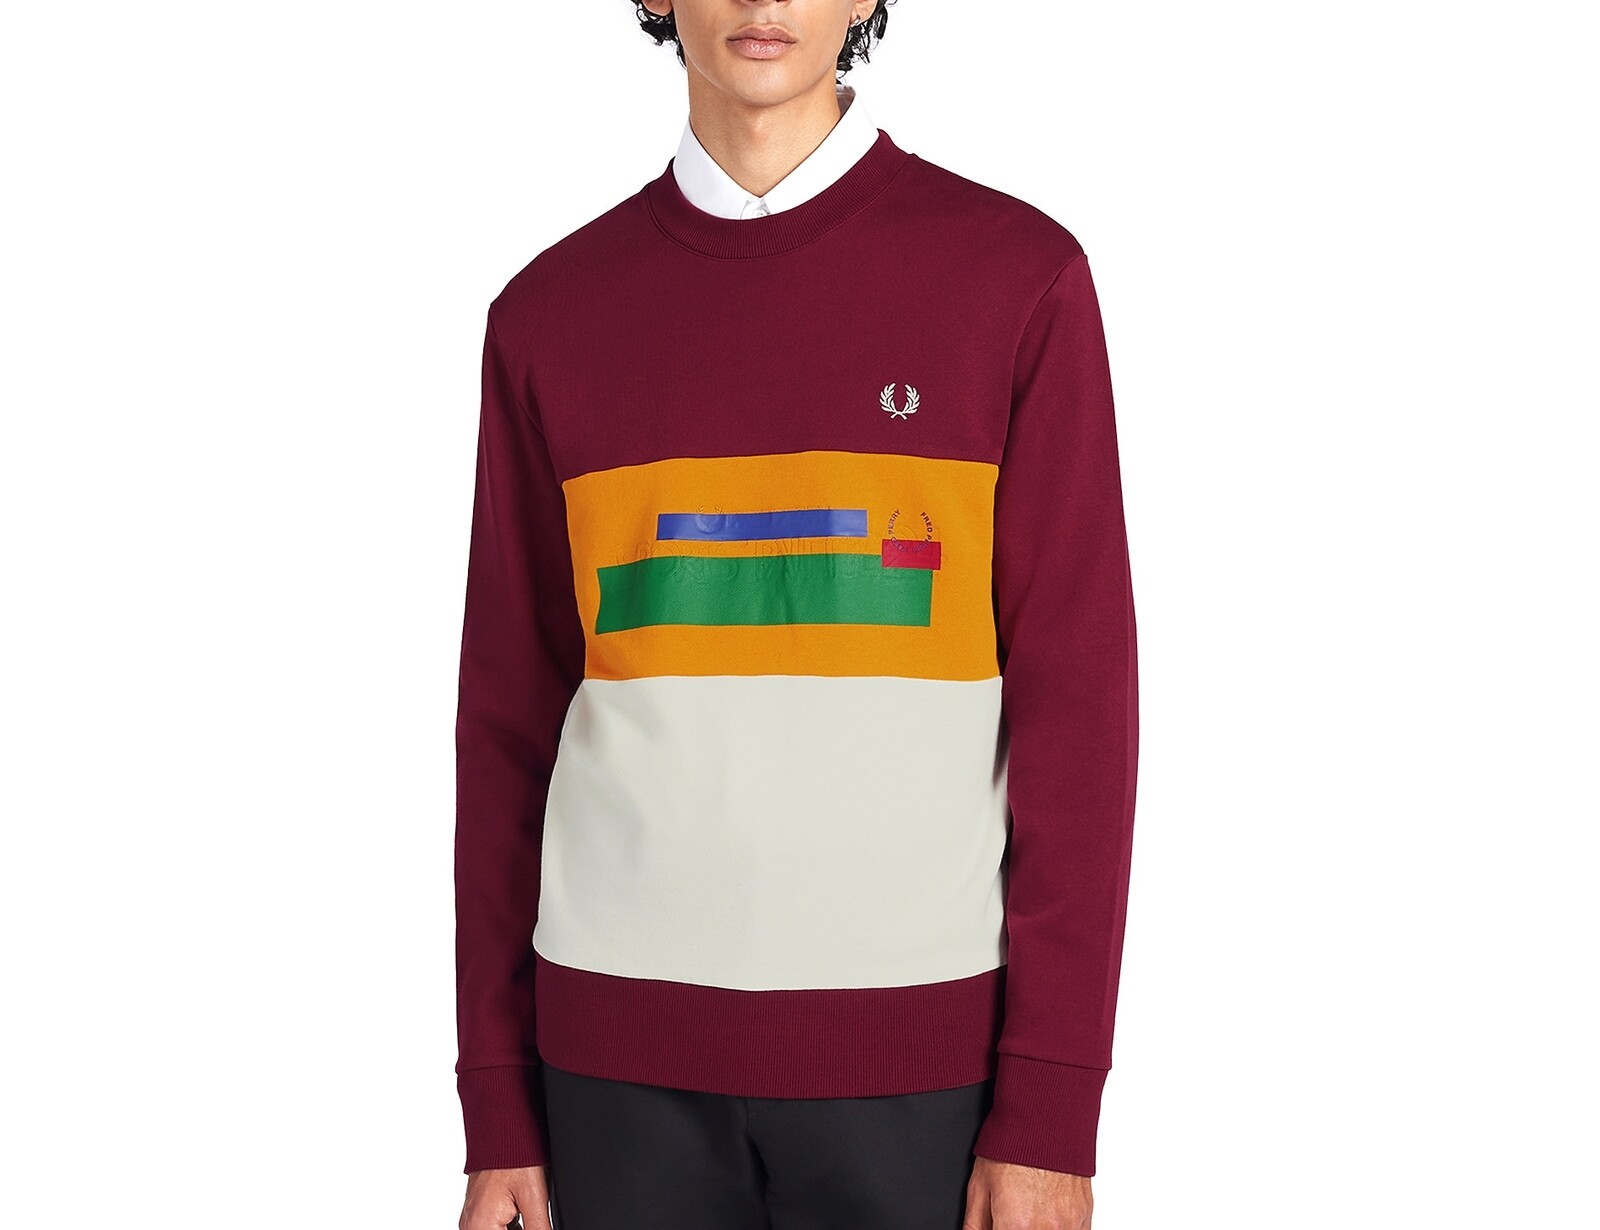 Fred Perry Mixed Graphic Sweatshirt Truien